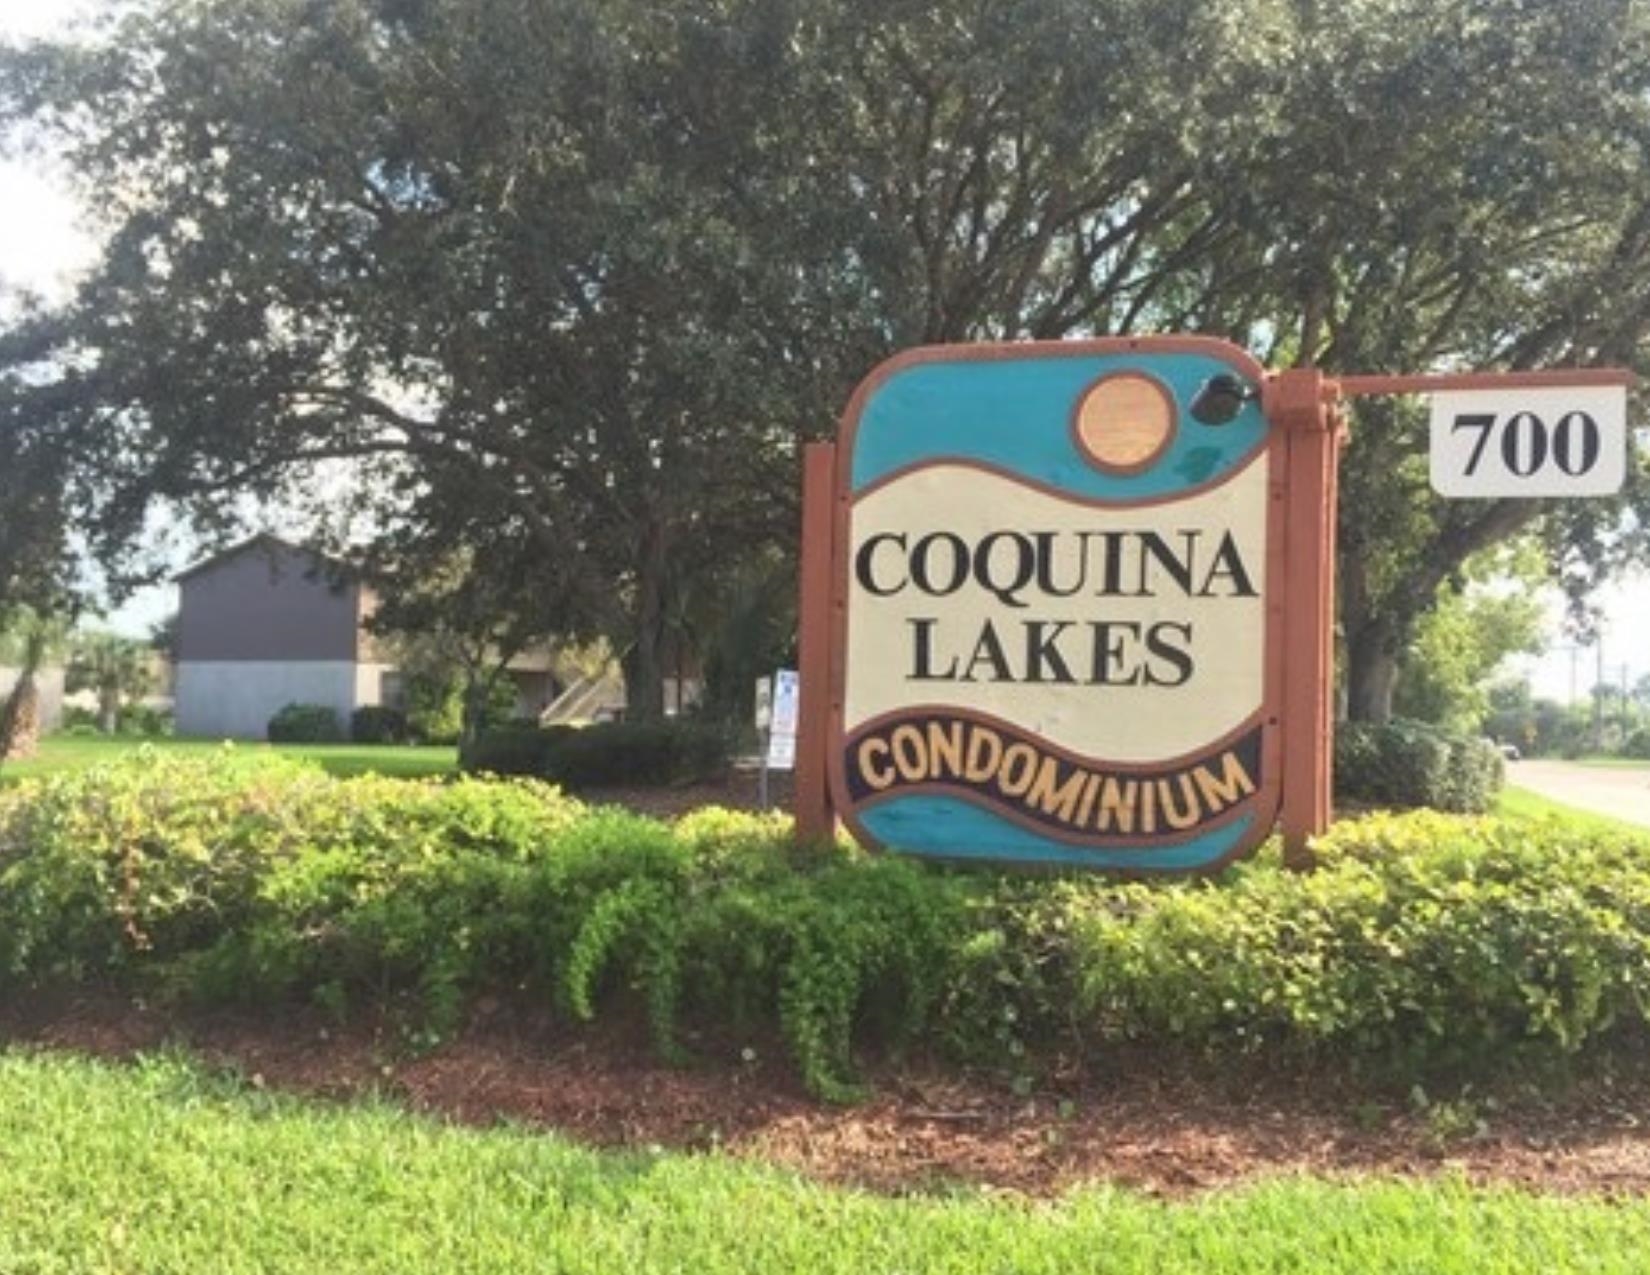 Take a dip in the Community Pool & enjoy lake views in this 2BR/1BA.  Conveniently located under 1.5 miles from the beach and less than 4 miles from Historic Downtown St. Augustine!